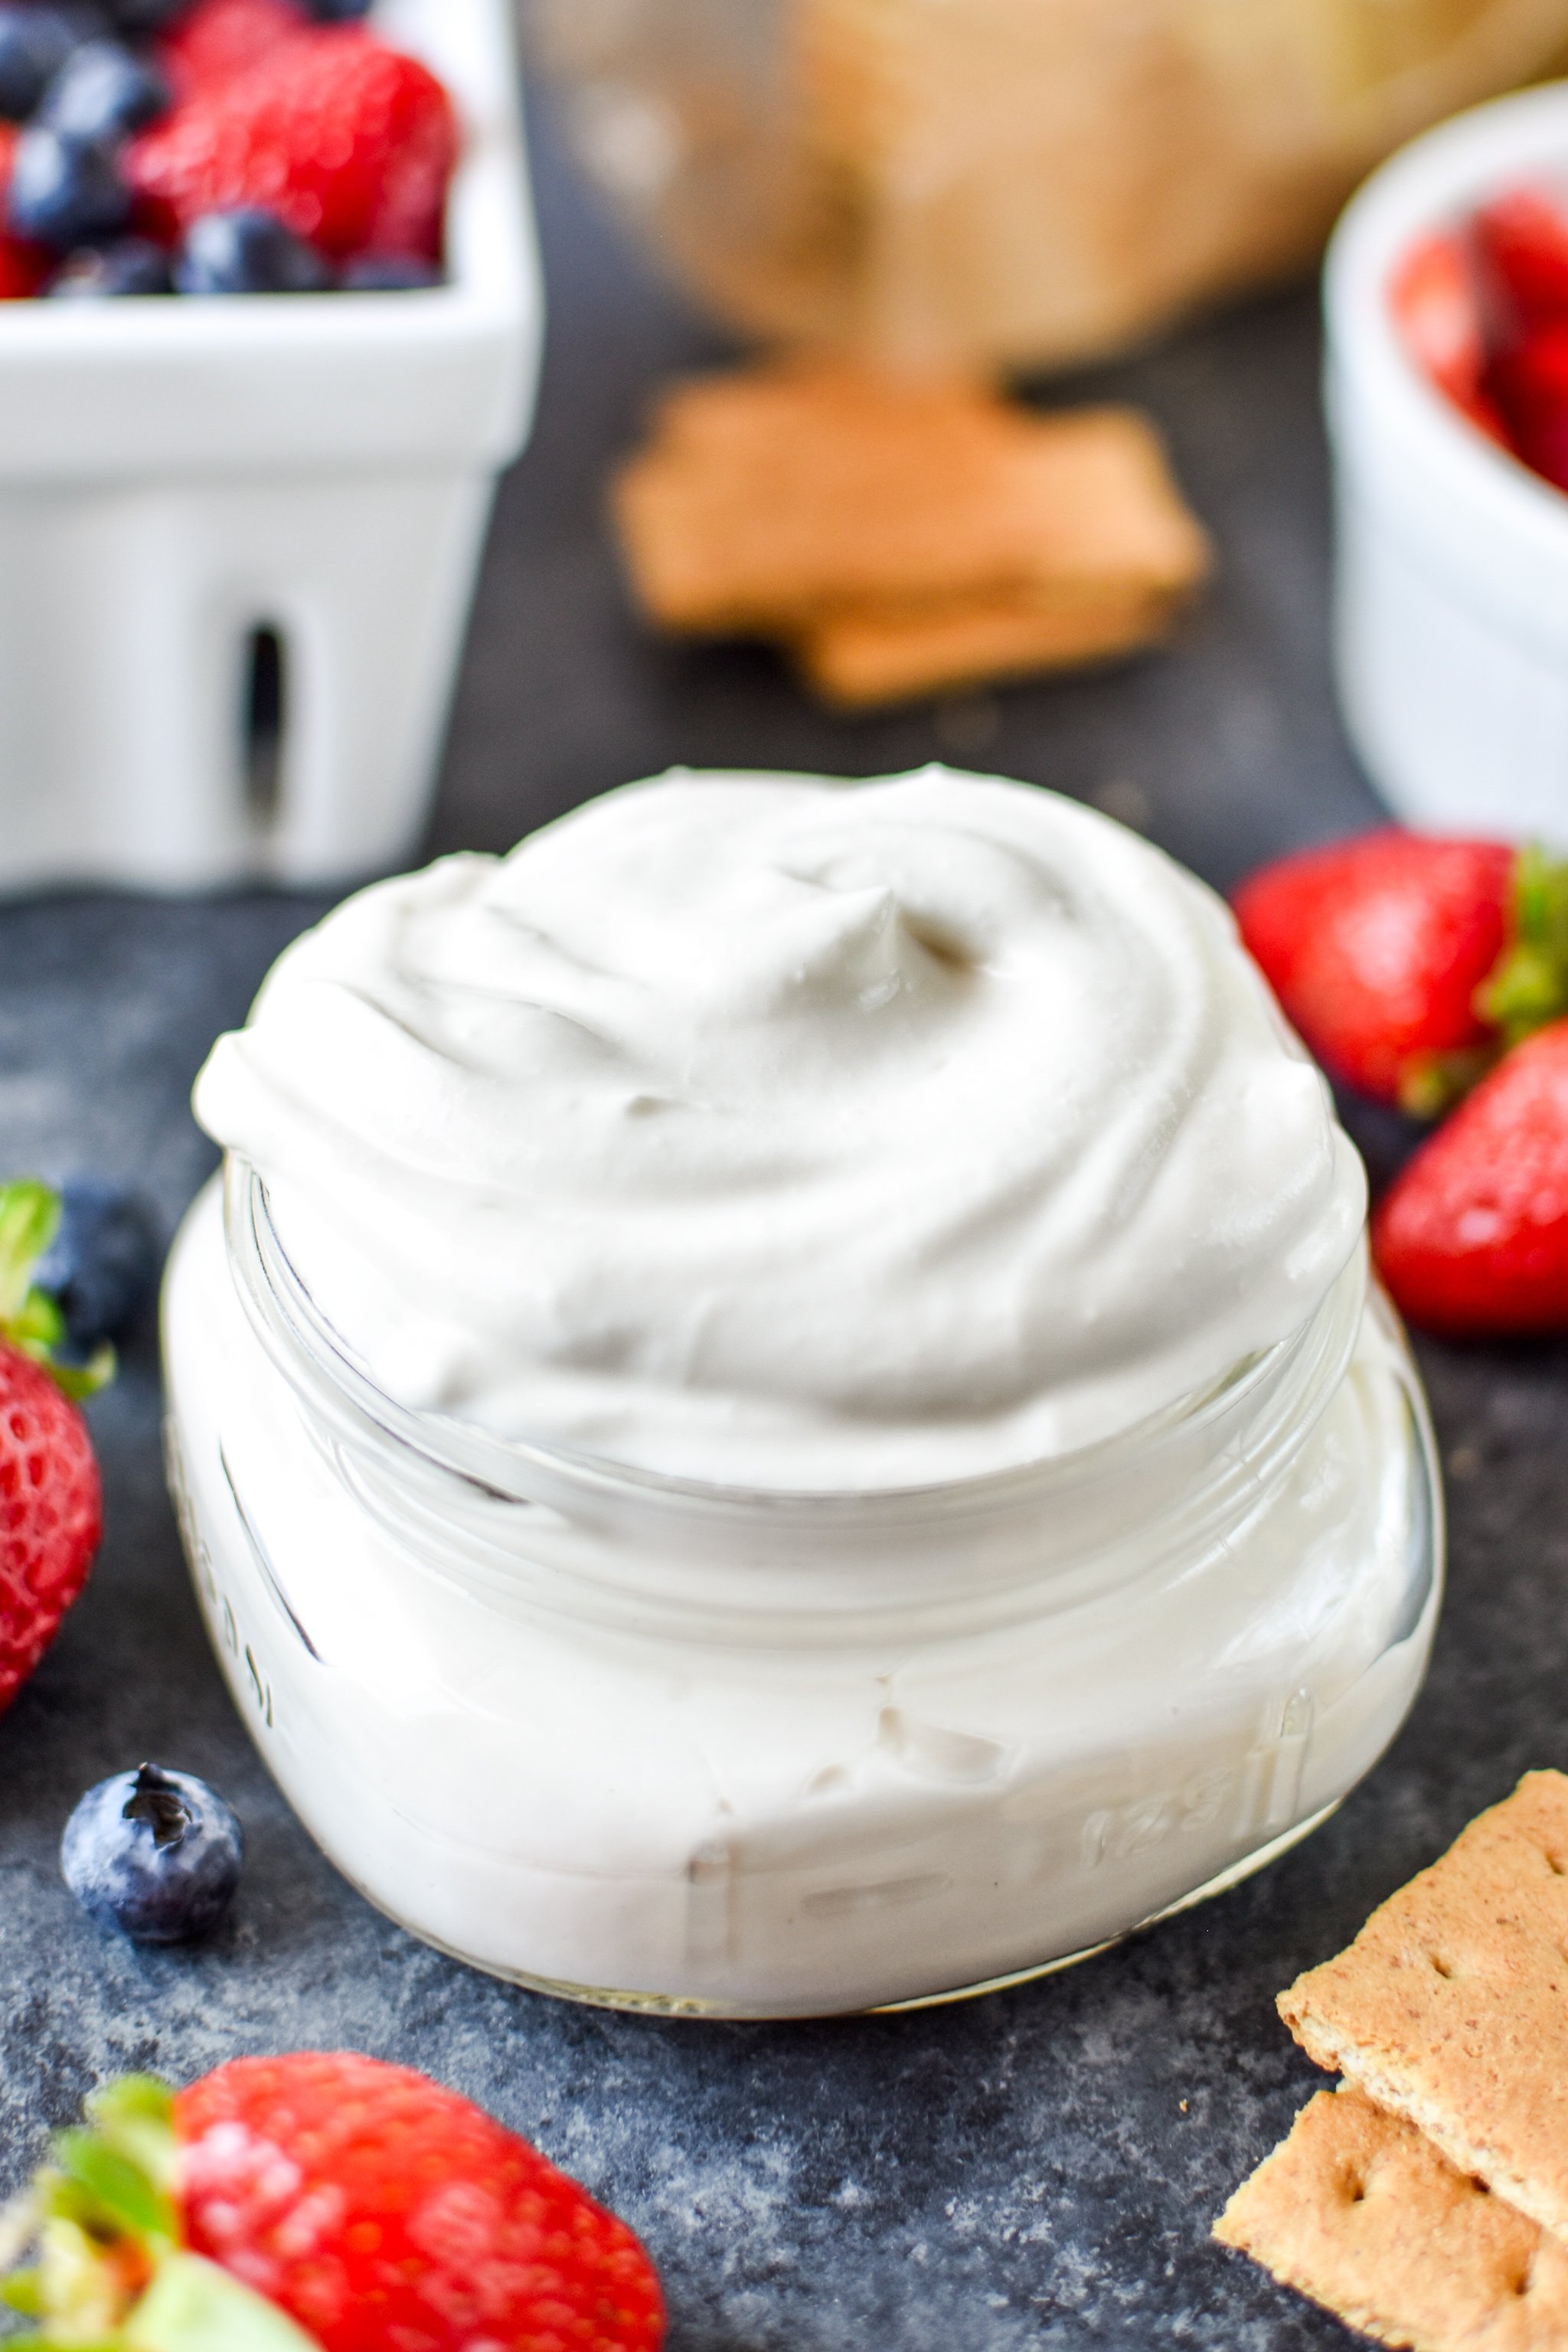 Learn how to make whipped greek yogurt like in this jar! Whipped and airy, perfect for dipping or eating with a spoon!